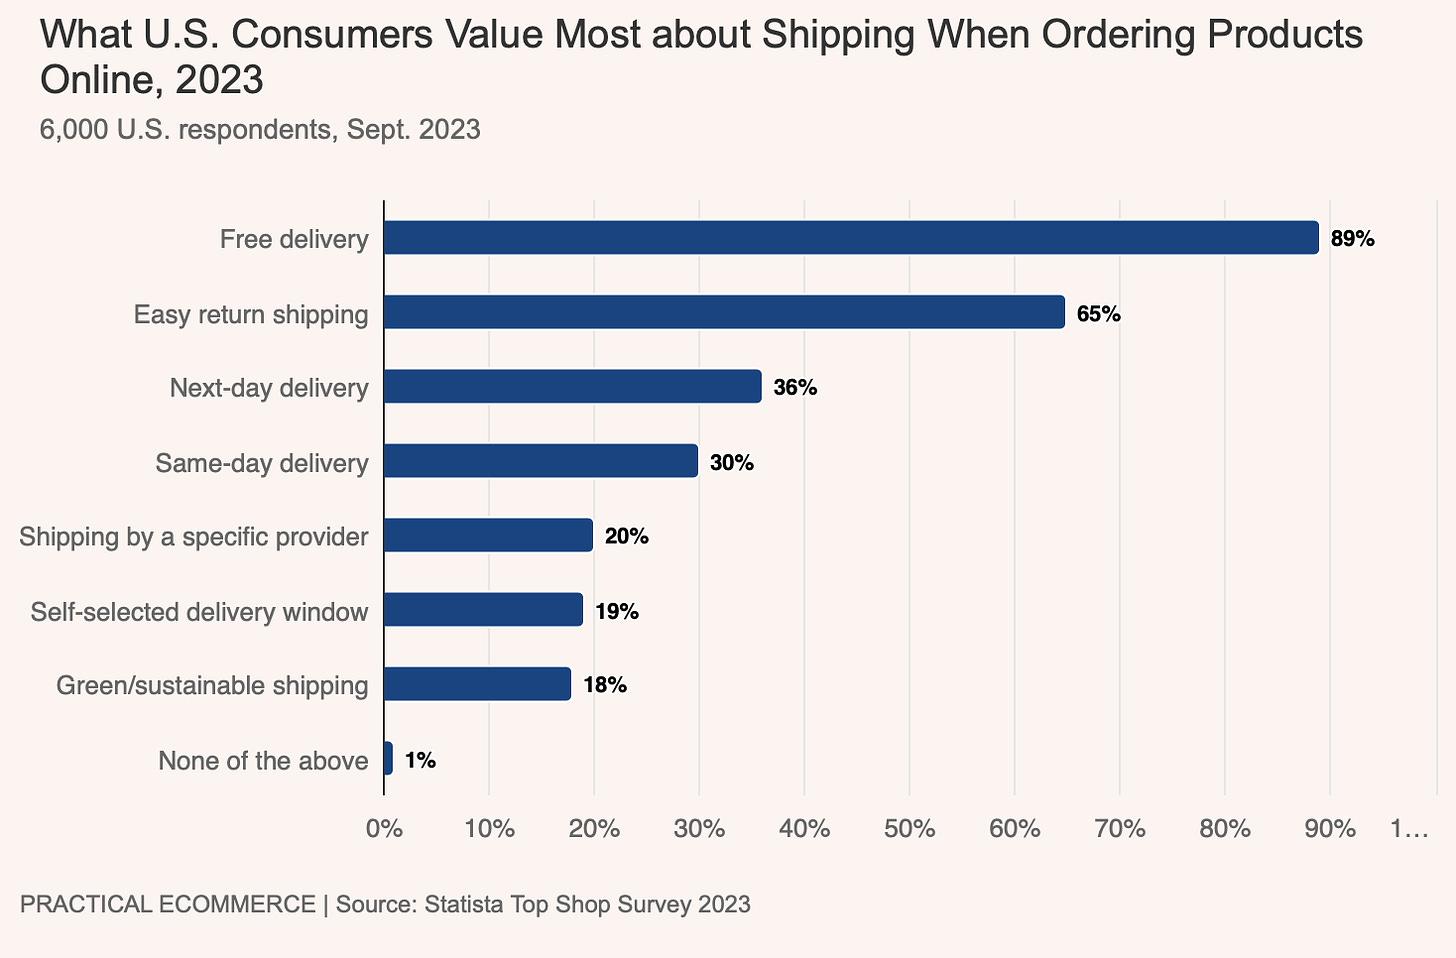 What U.S. Consumers Value Most about Shipping When Ordering Products Online, 2023